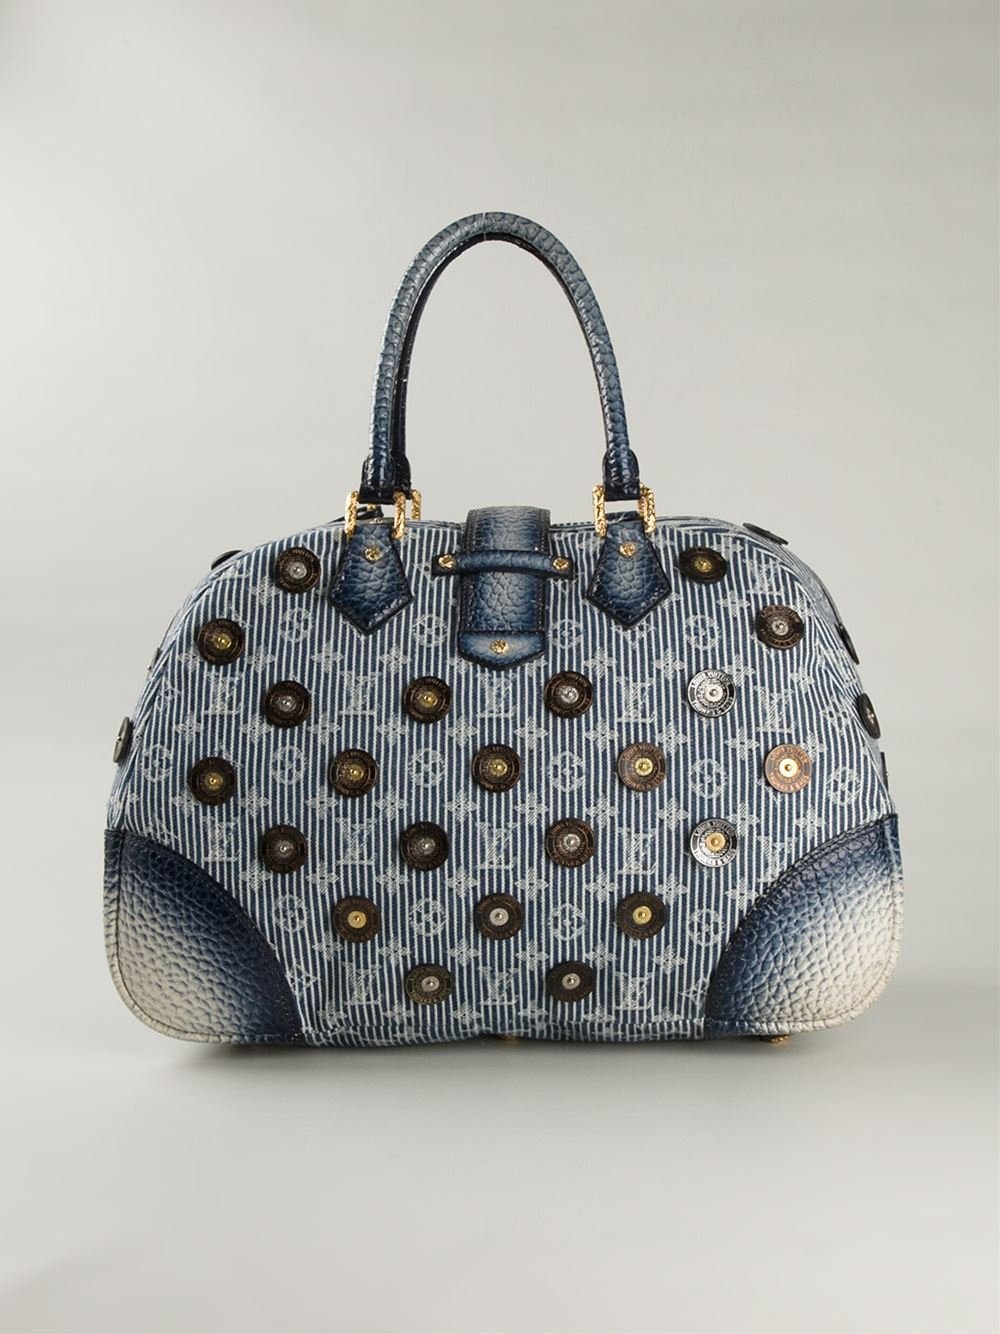 Louis Vuitton Monogrammed Bowling Bag in Blue - Lyst